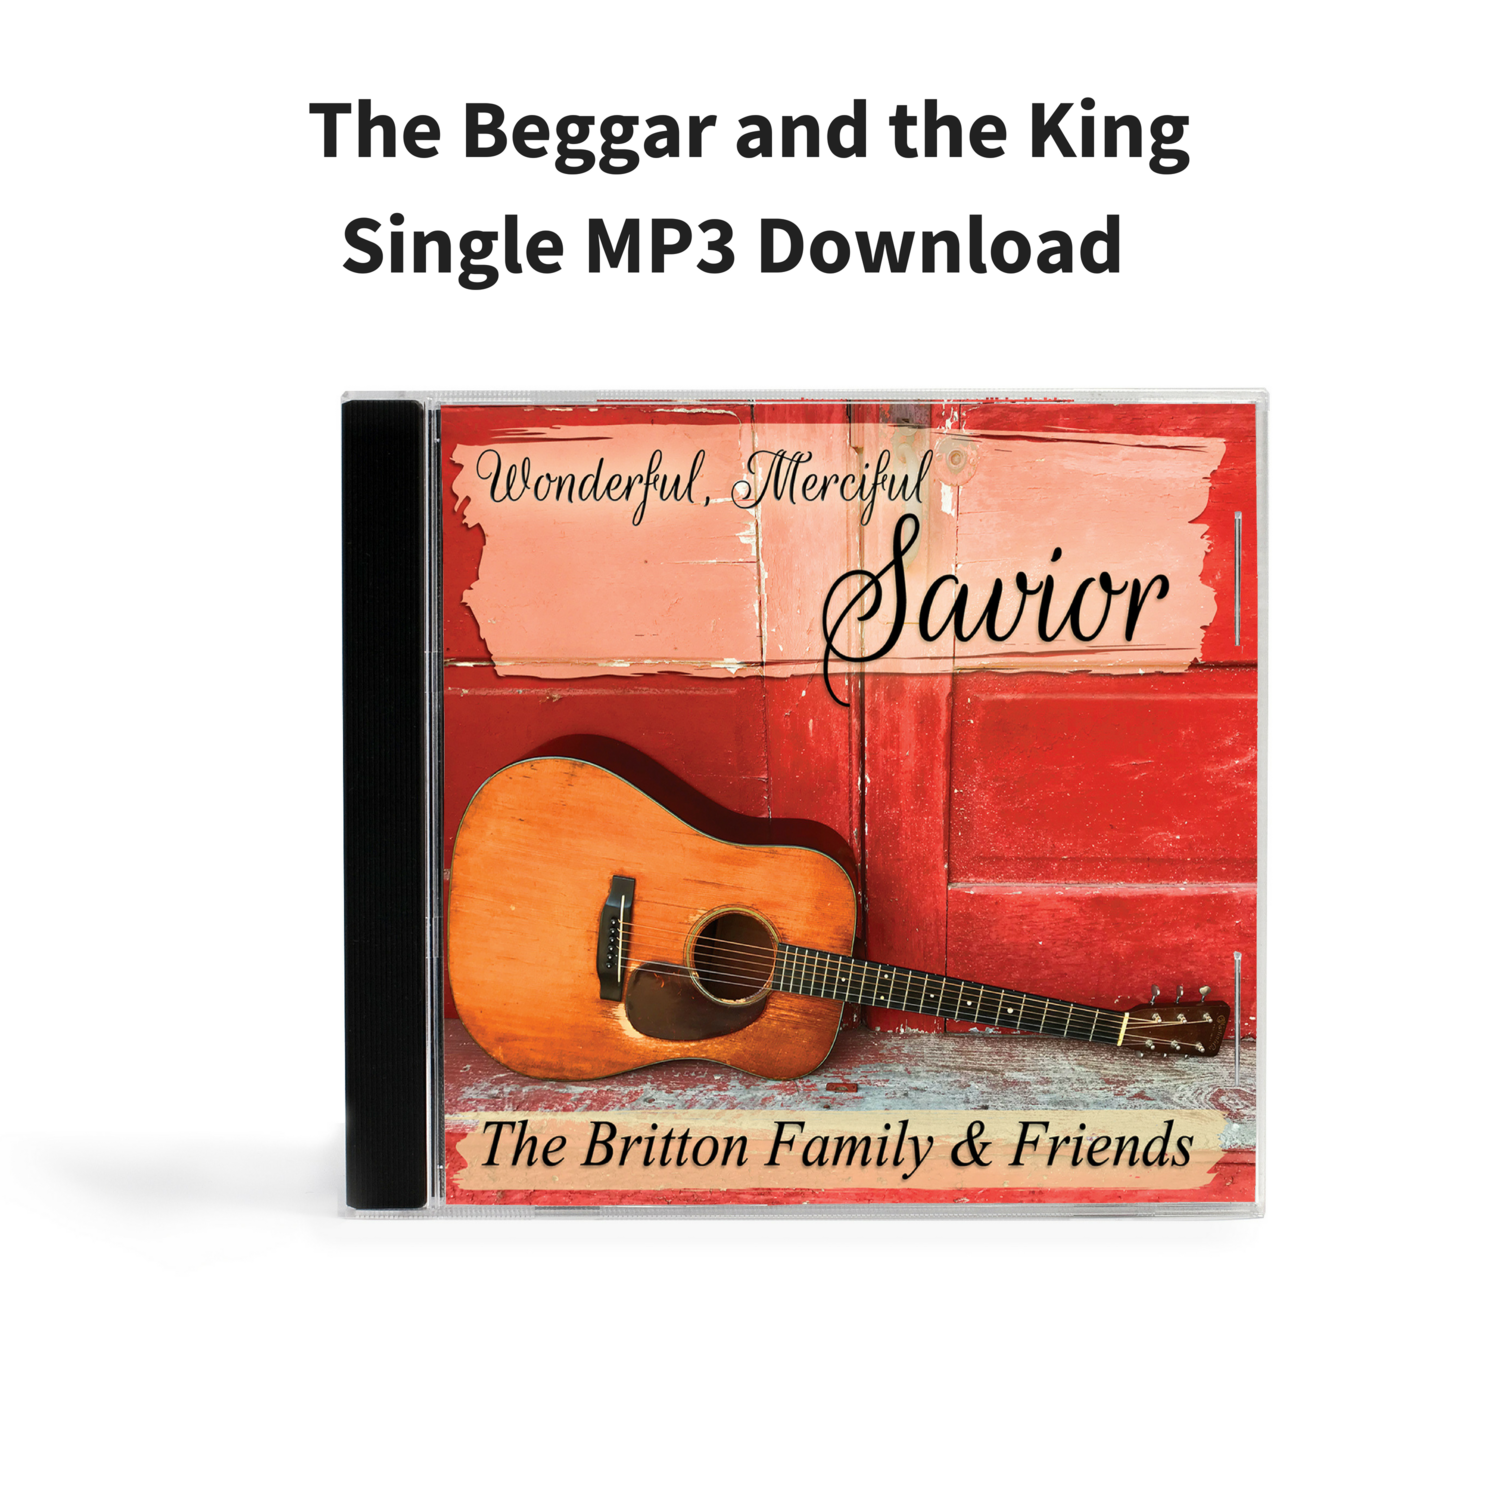 The Beggar and the King - Single MP3 Download